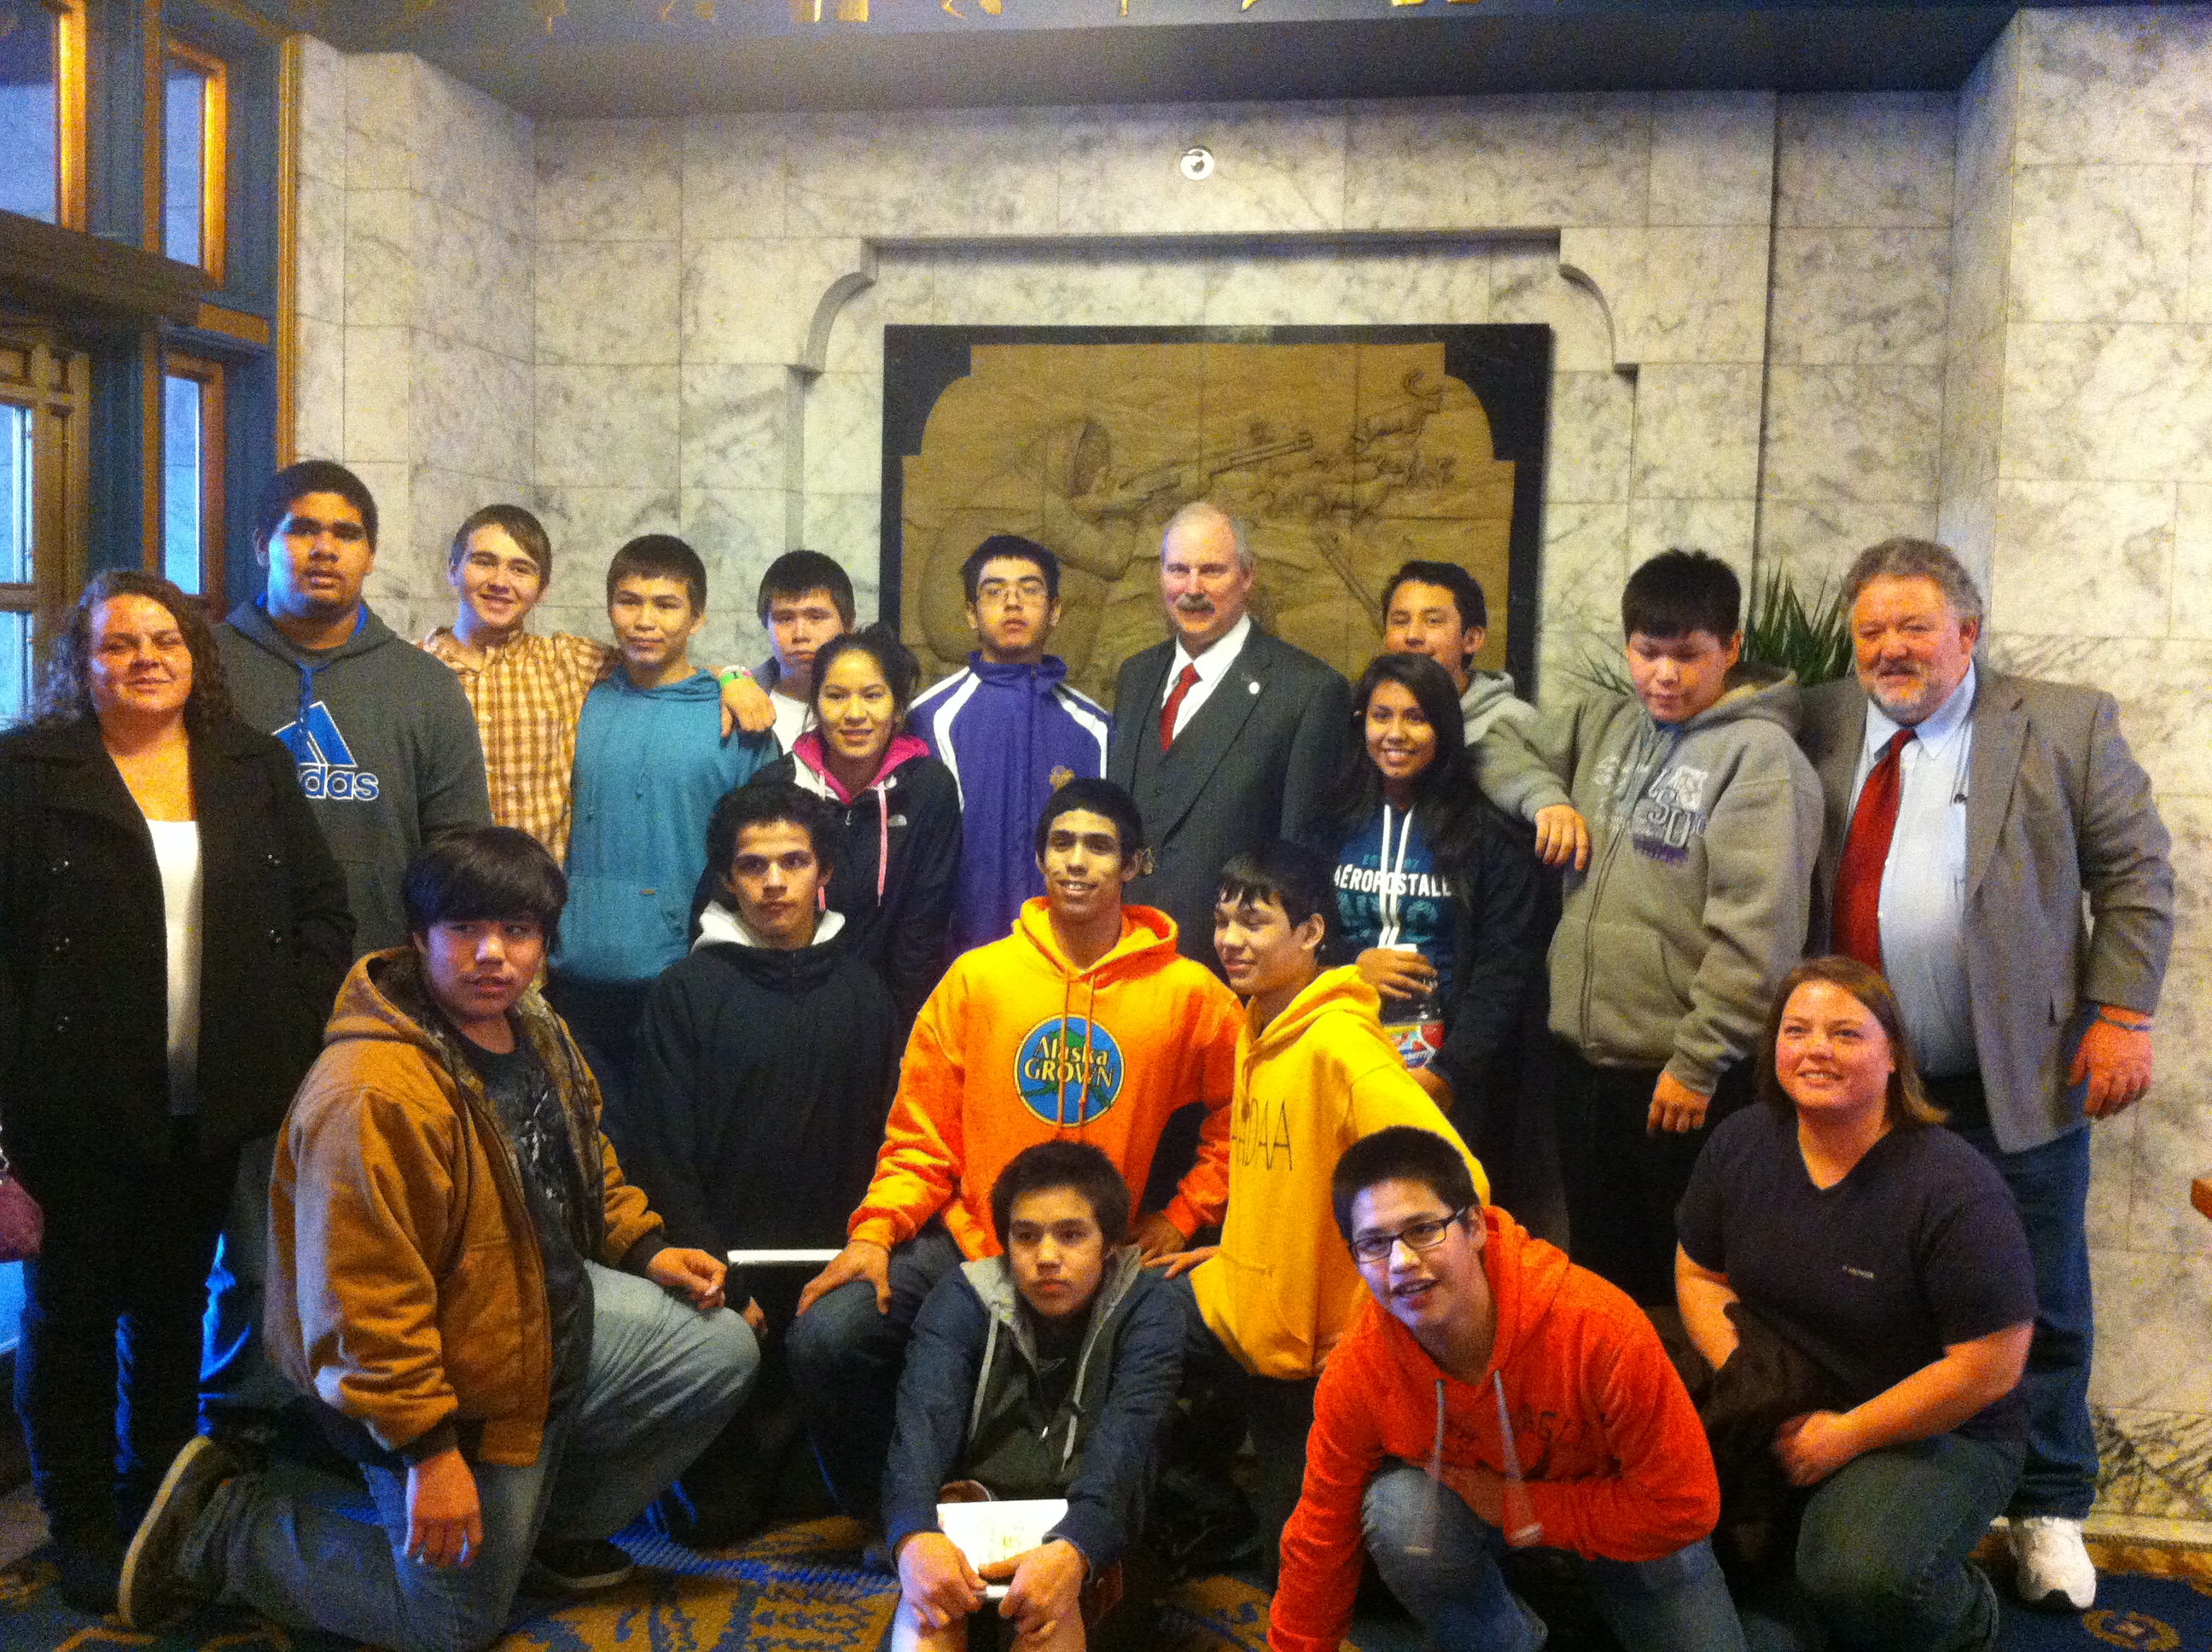 Senator Stedman with students and delegates from the Hydaburg City School District